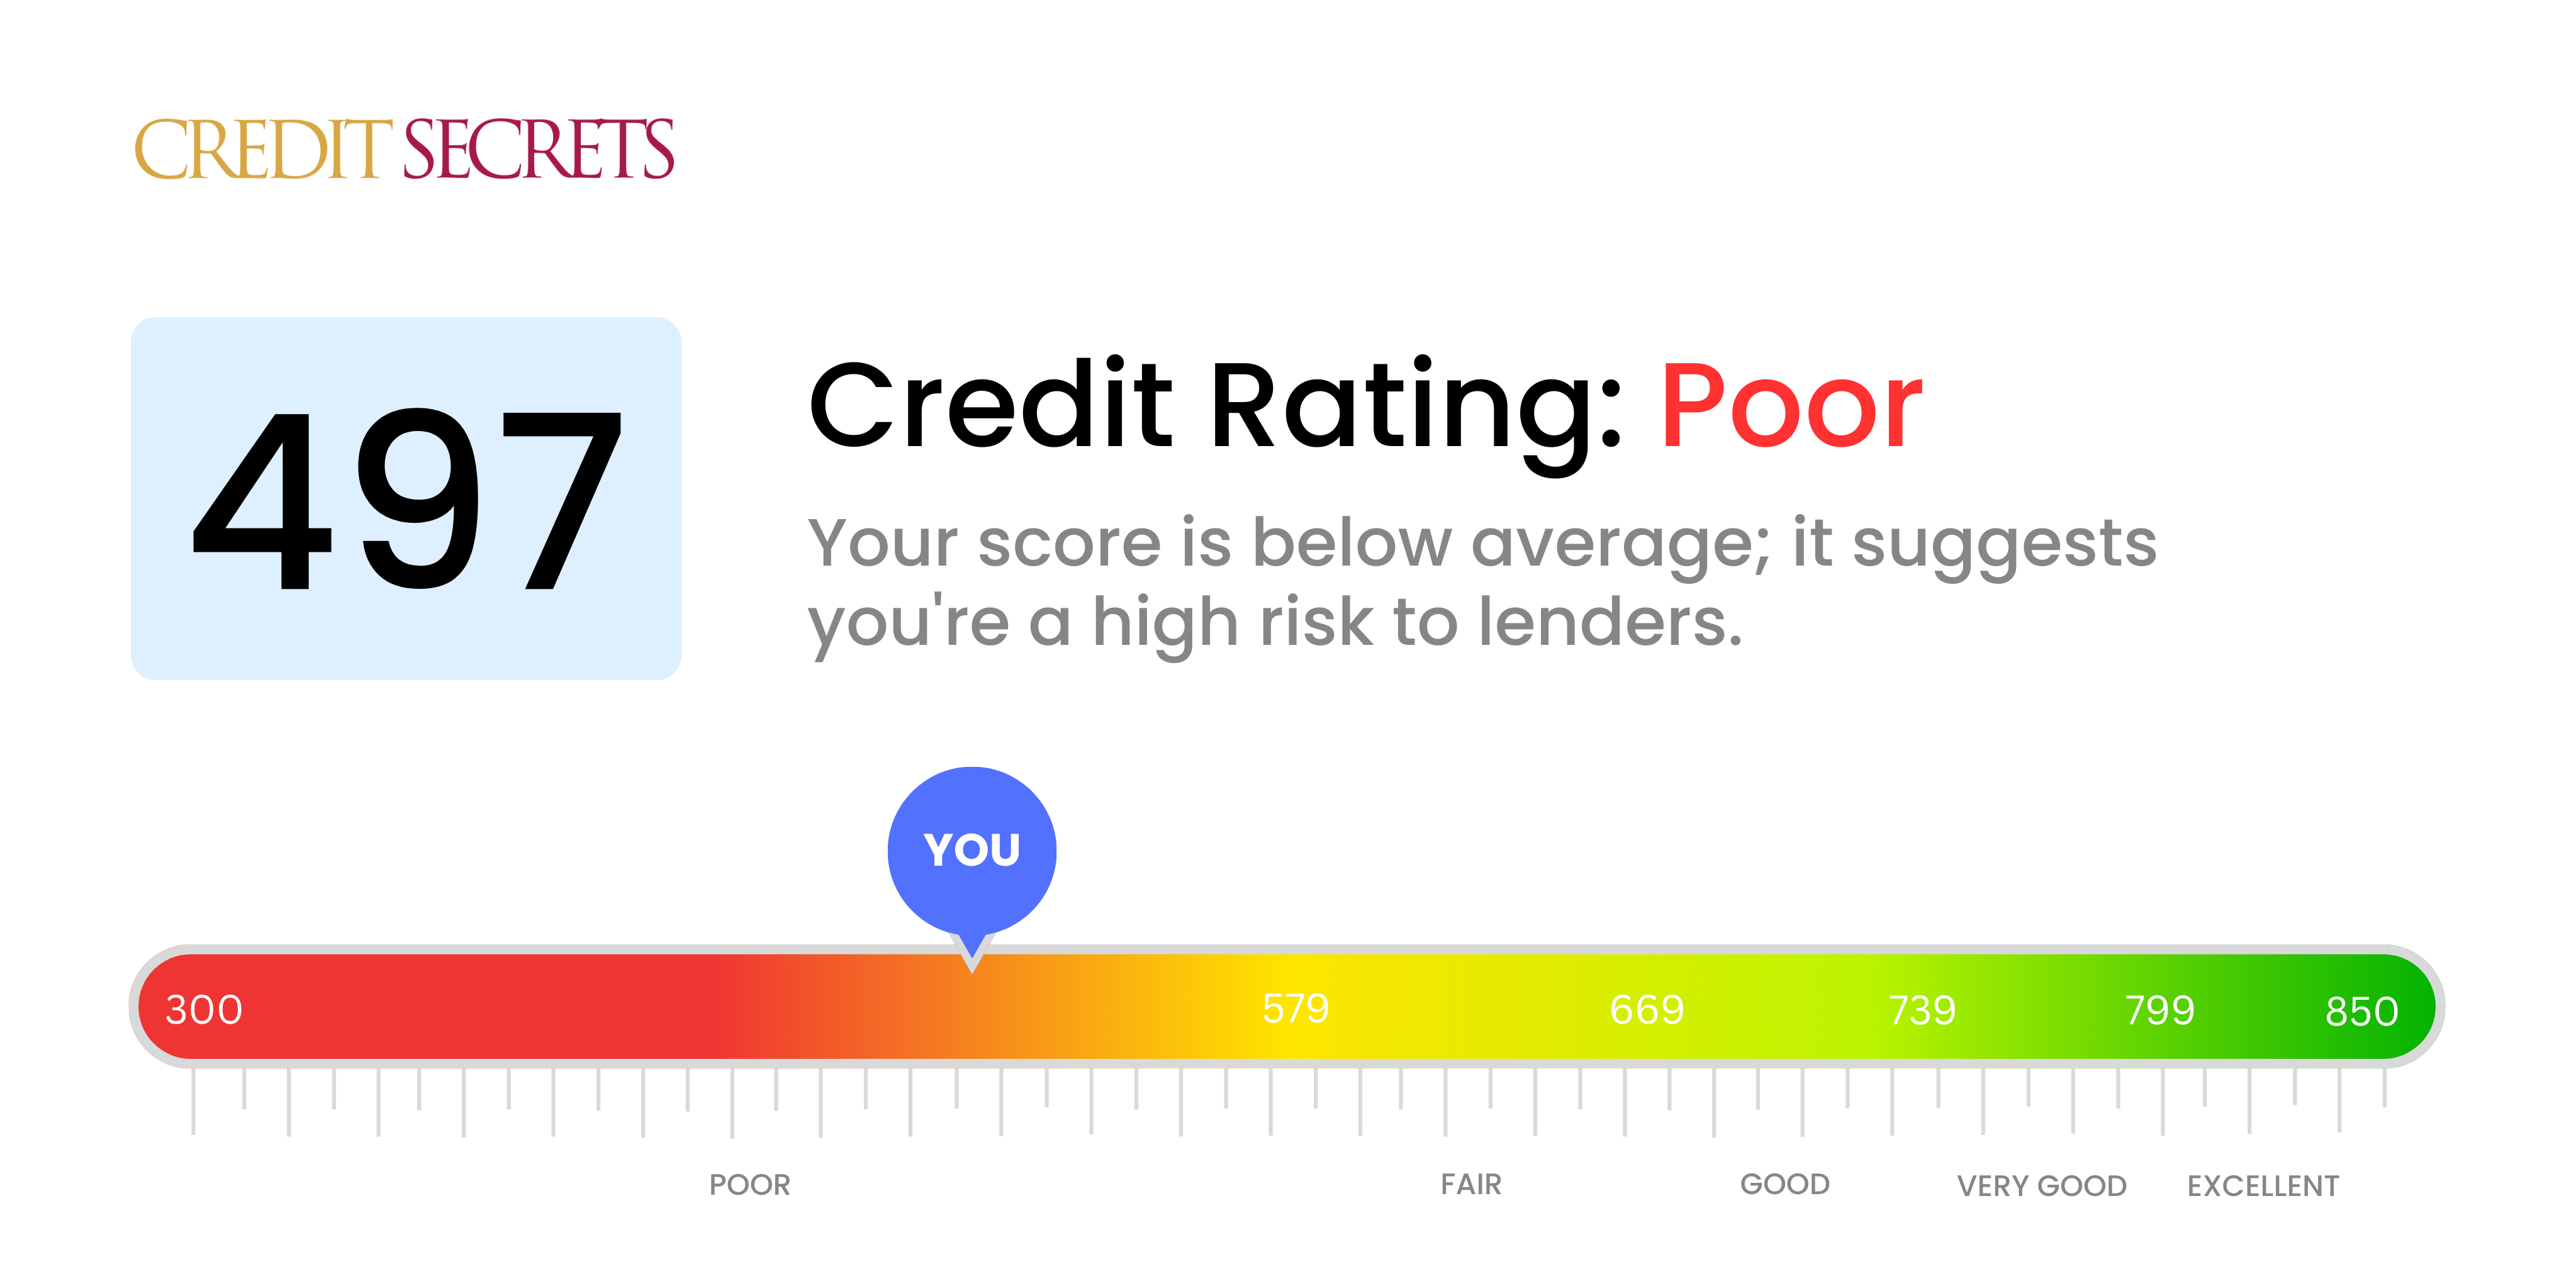 Is 497 a good credit score?